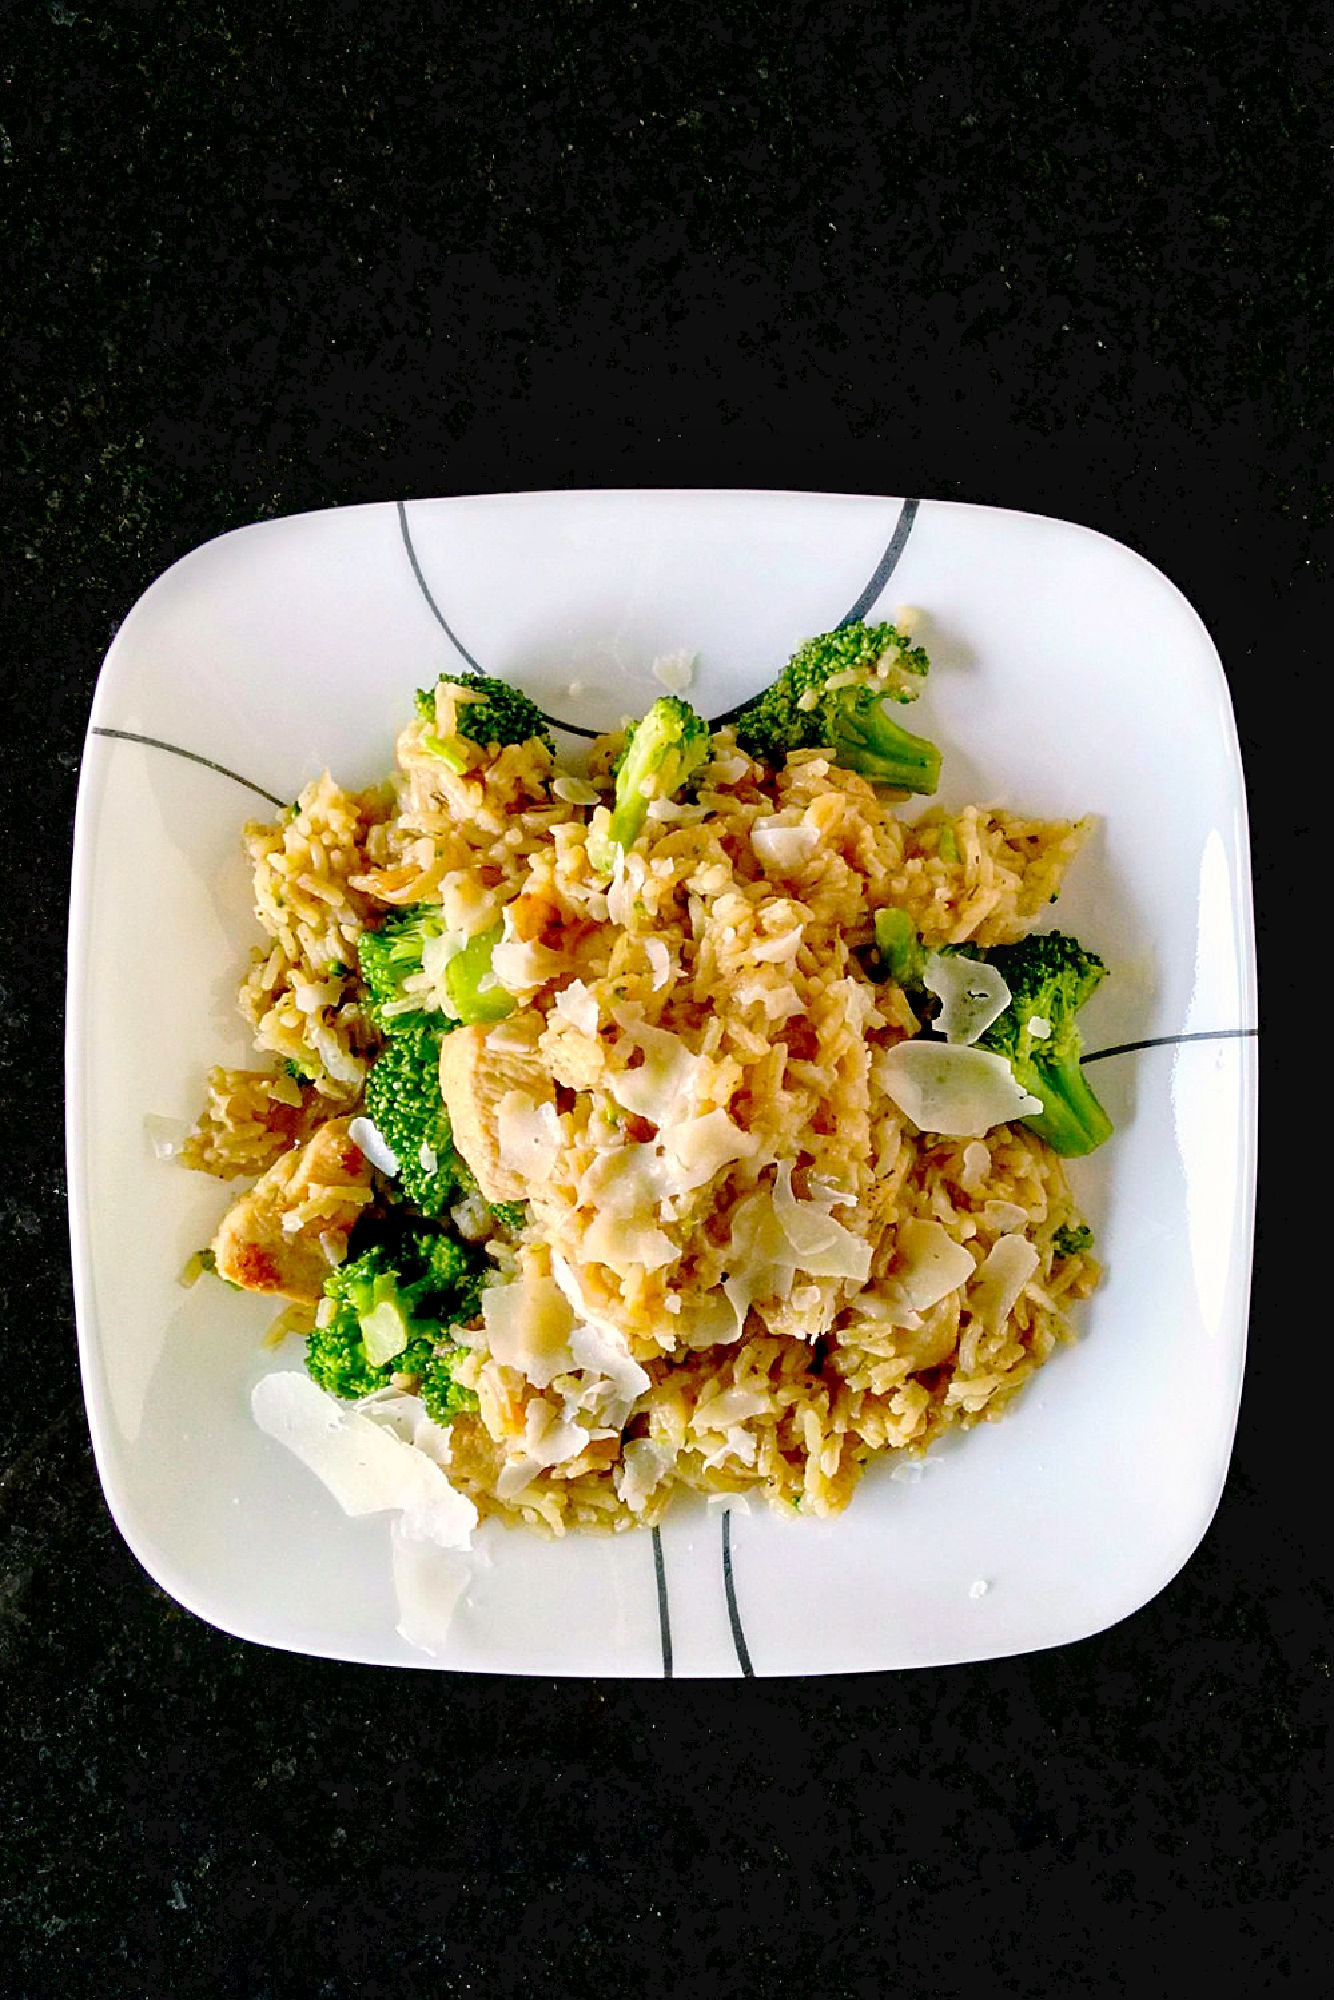 A delicious one skillet meal, this Cheesy Broccoli Chicken and Rice is hearty and full of flavor. Your picky eaters won't mind eating broccoli in this dish! #OurFamilyTable